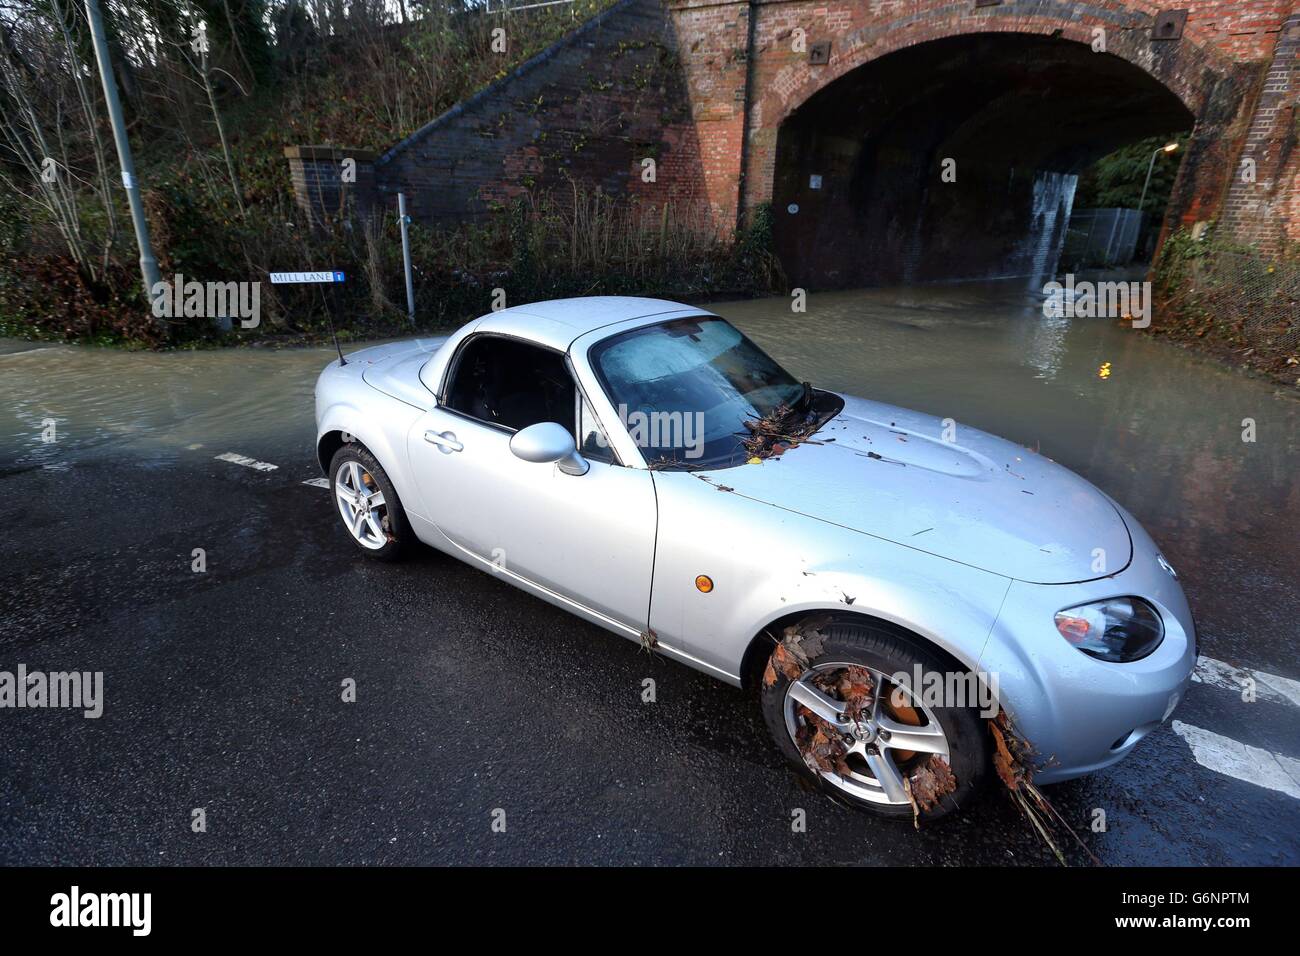 An abandoned car in Leatherhead, Surrey after floods hit the area. Many people are facing a miserable Christmas Day in the wake of the stormy weather with thousands either evacuated from their homes or left without power. Stock Photo